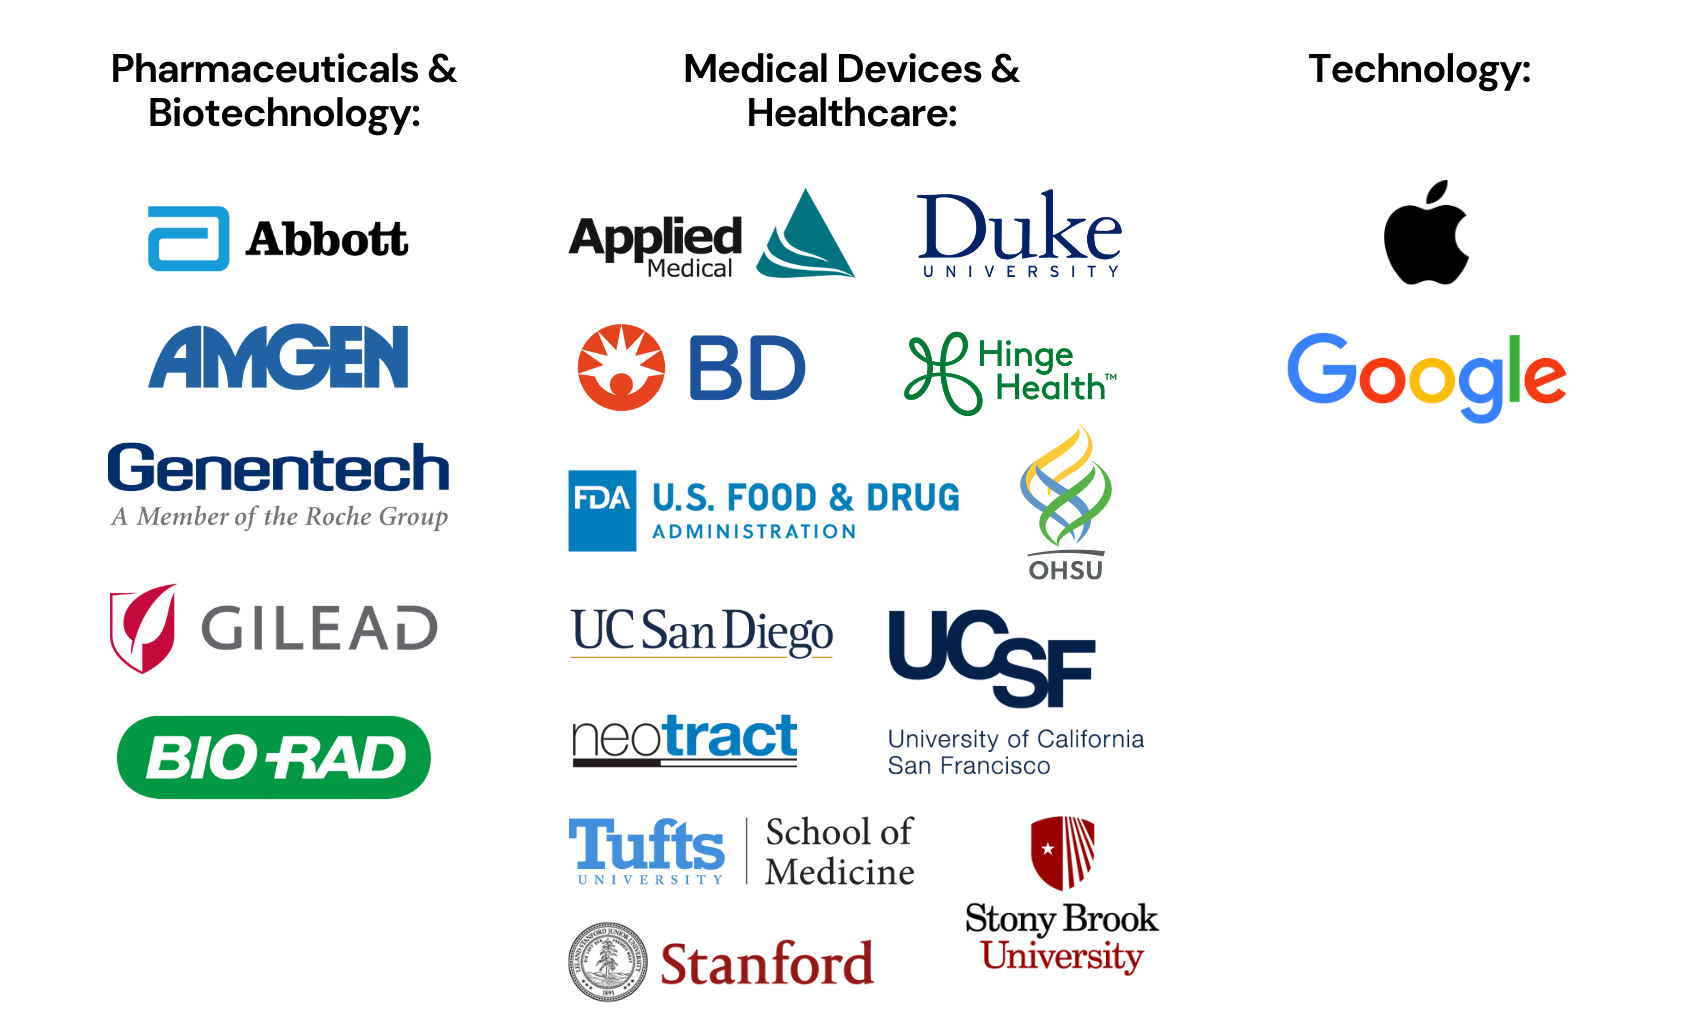 Pharmaceuticals and Biotechnology: Abbott, Amgen, Genentech, Gilead Sciences, BioRad Lab Medical Devices and Healthcare: Applied Medical, BD Biosciences, FDA, Hinge Health, NeoTract, UCSD, UCSF, Tufts School of Medicine, Duke University, Oregon Health and Sciences University, Stanford University, Stony Brook University Technology: Apple, Google